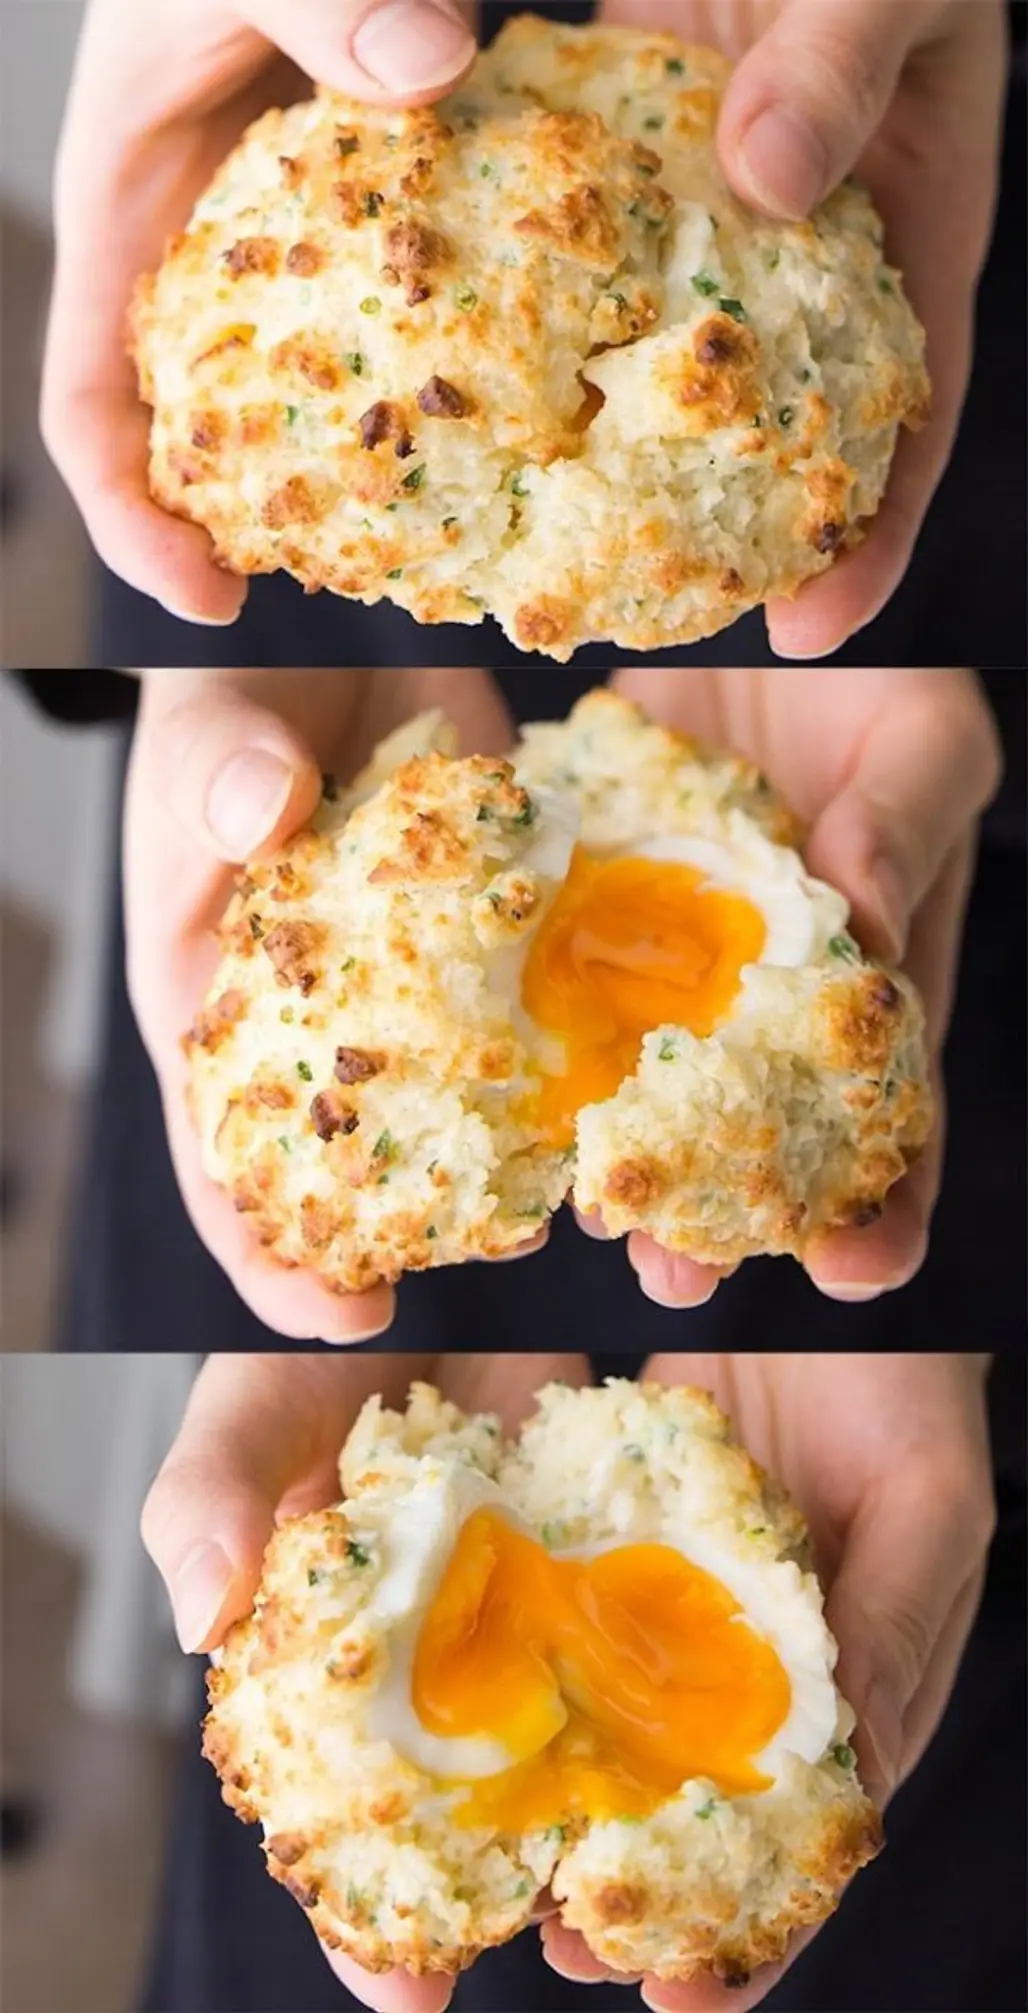 Soft Boiled Egg in a Biscuit